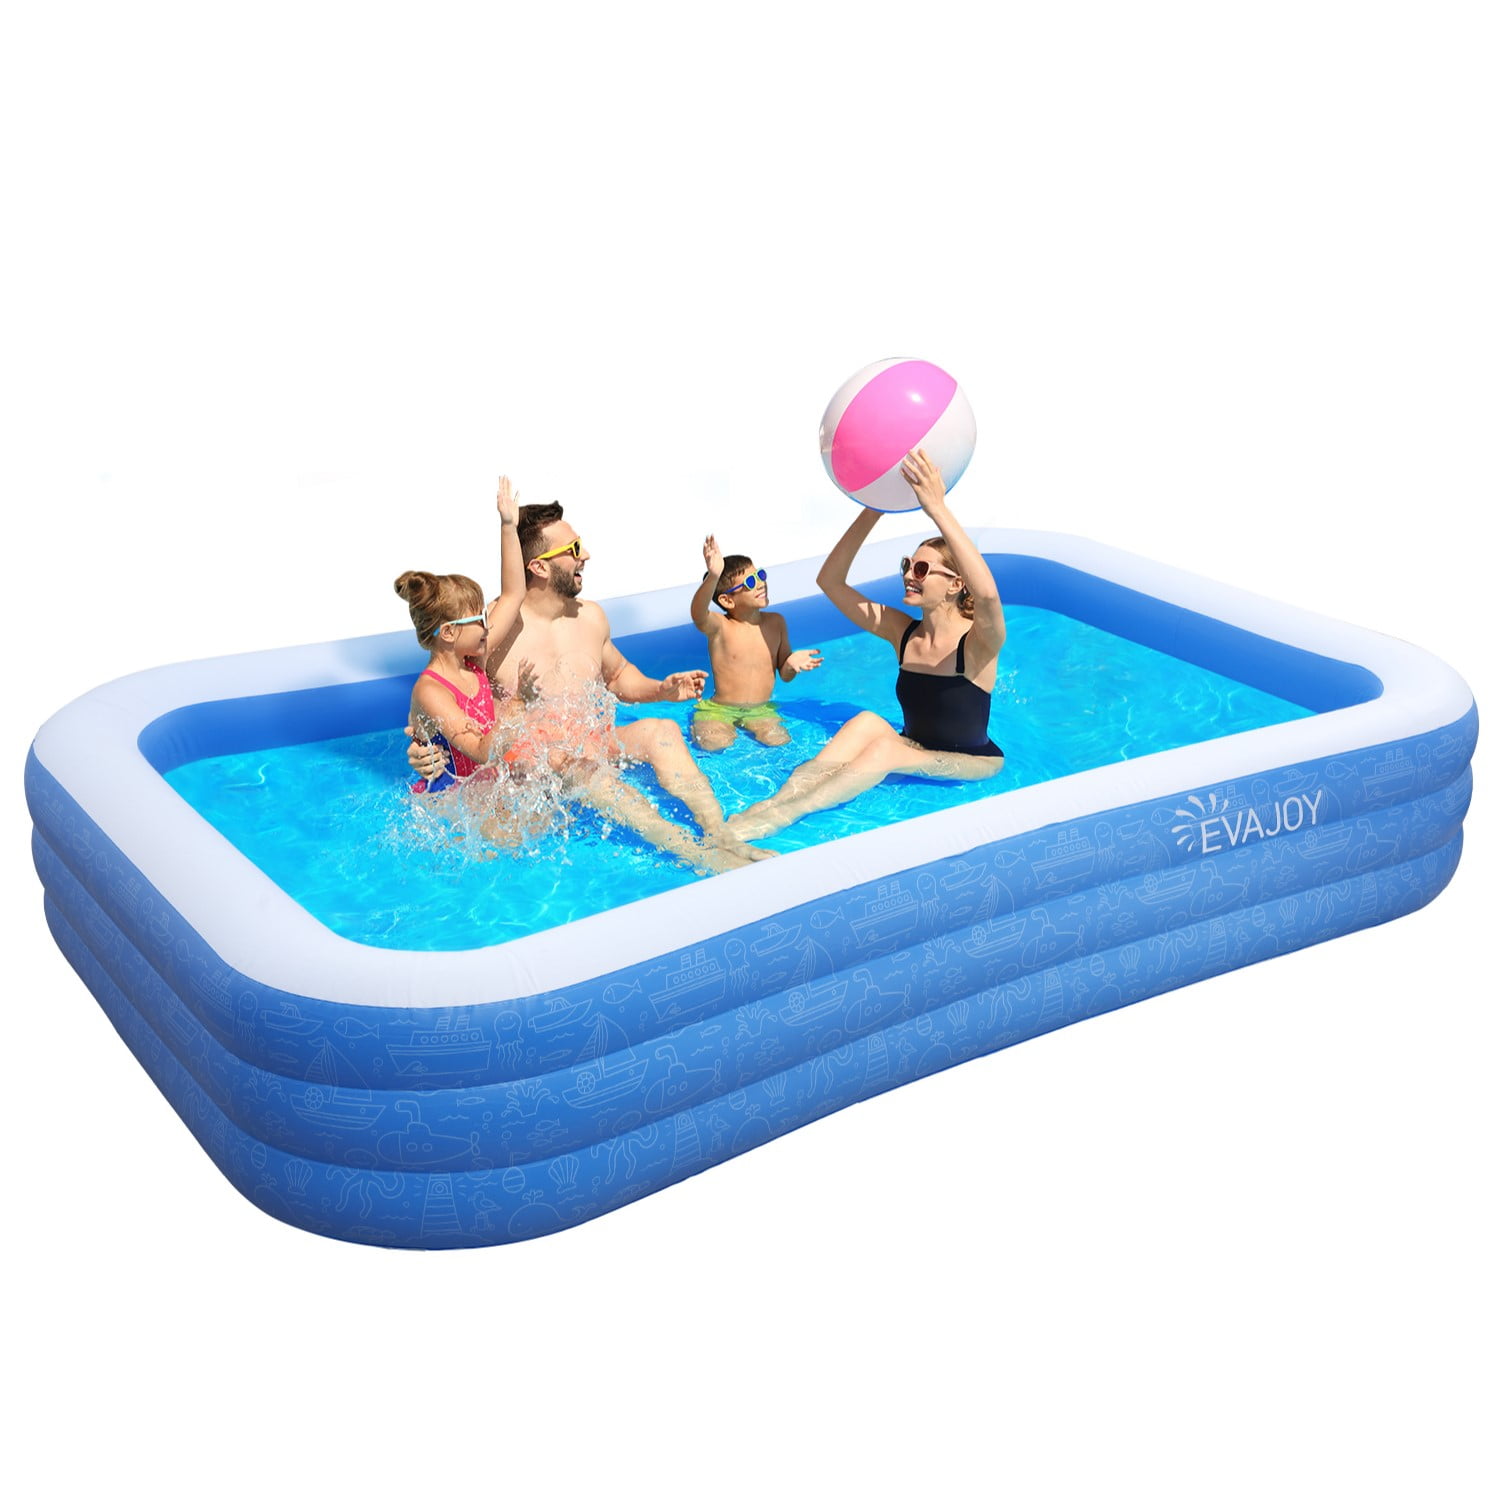 Party Blow Up for Backyard 103x 69x 24 Kids Garden Toddlers AsterOutdoor Inflatable Swimming Pool Full-Sized Above Ground Kiddle Family Lounge Thickened Pool for Adult 